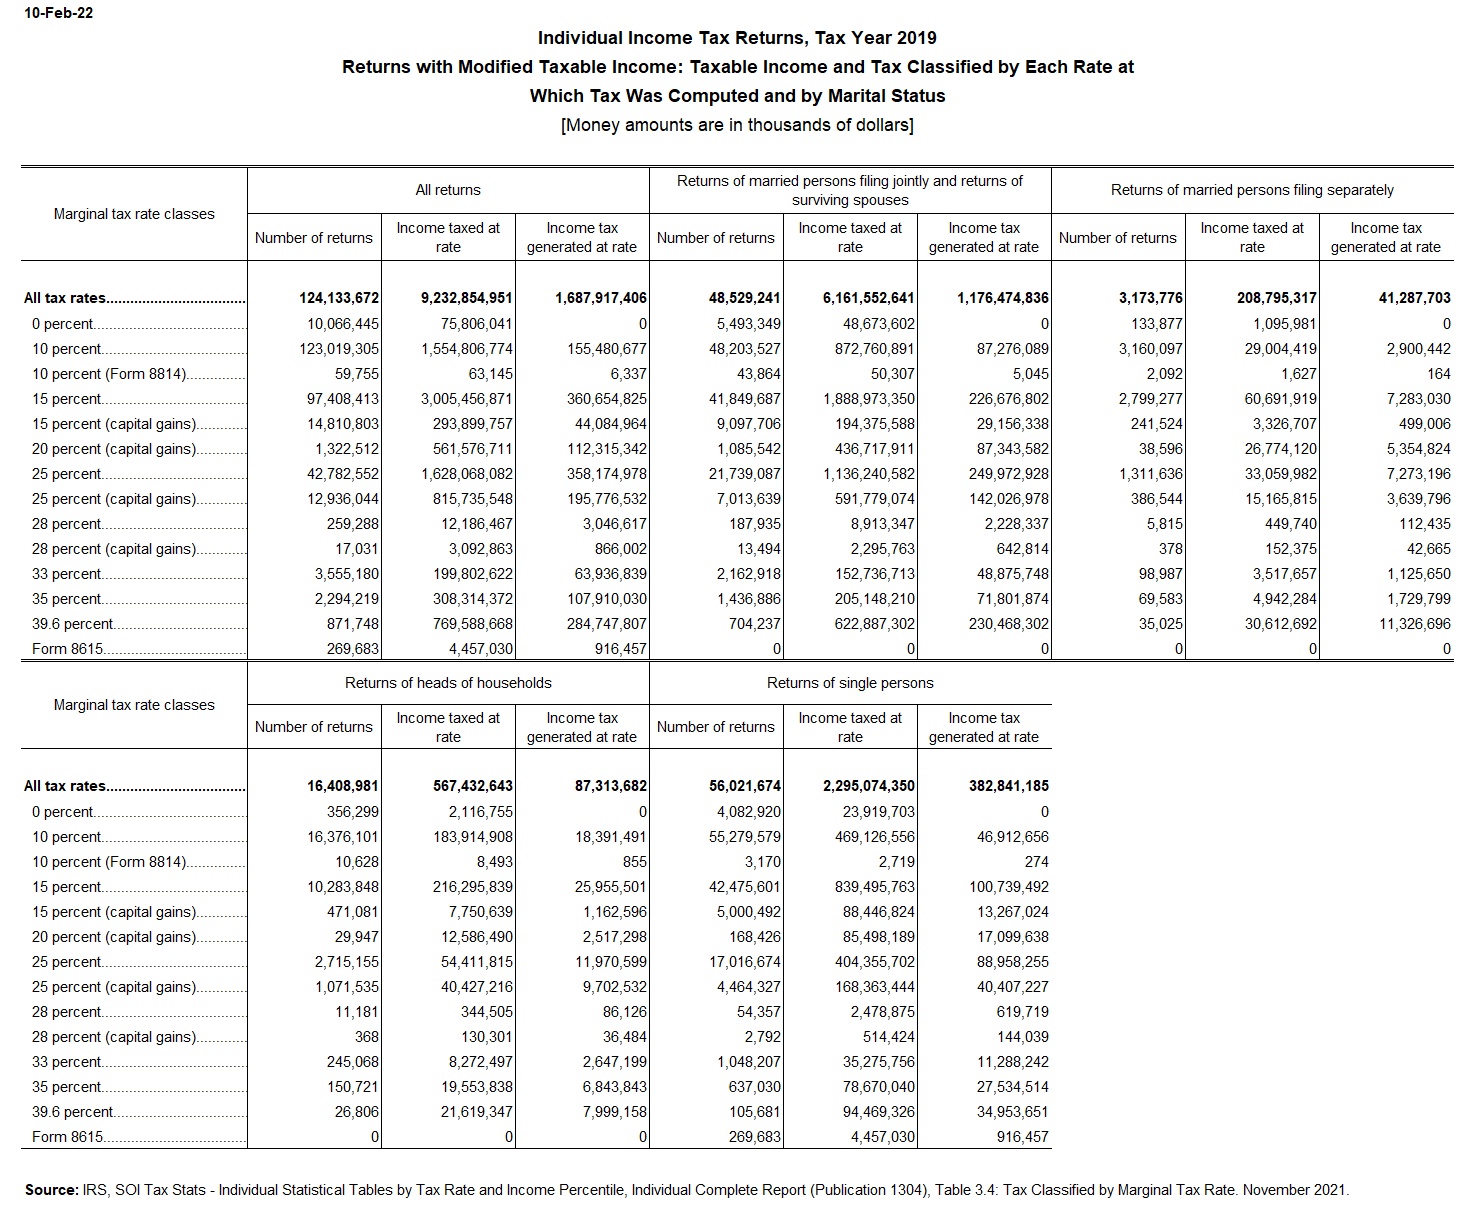 Marginal tax rate for modified taxable income returns by marital status